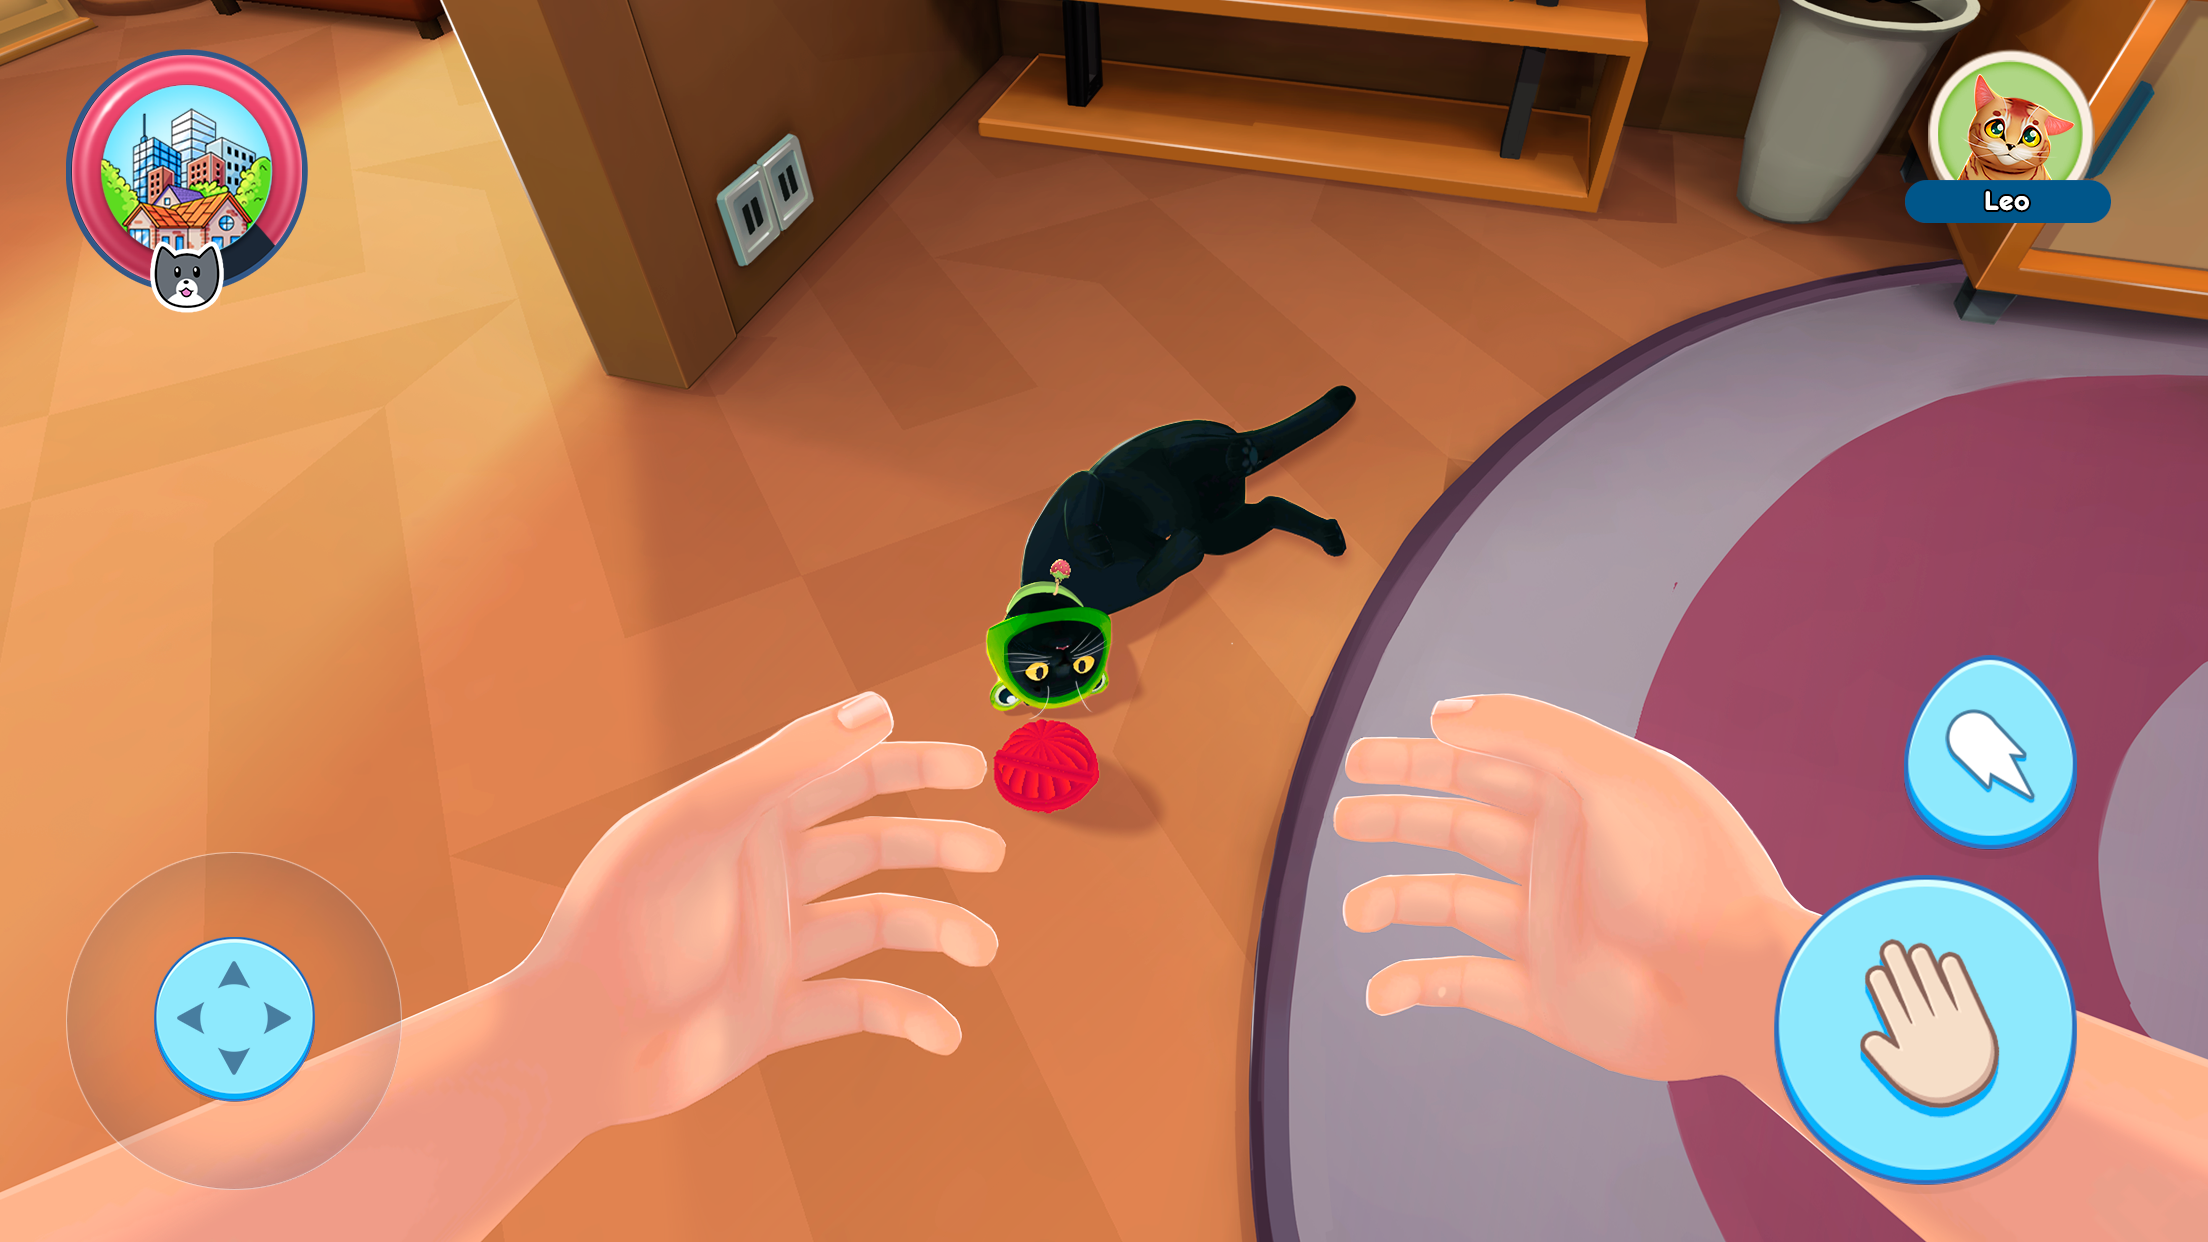 My Cat Loved the Stray Video Game as Much as I Did - CNET